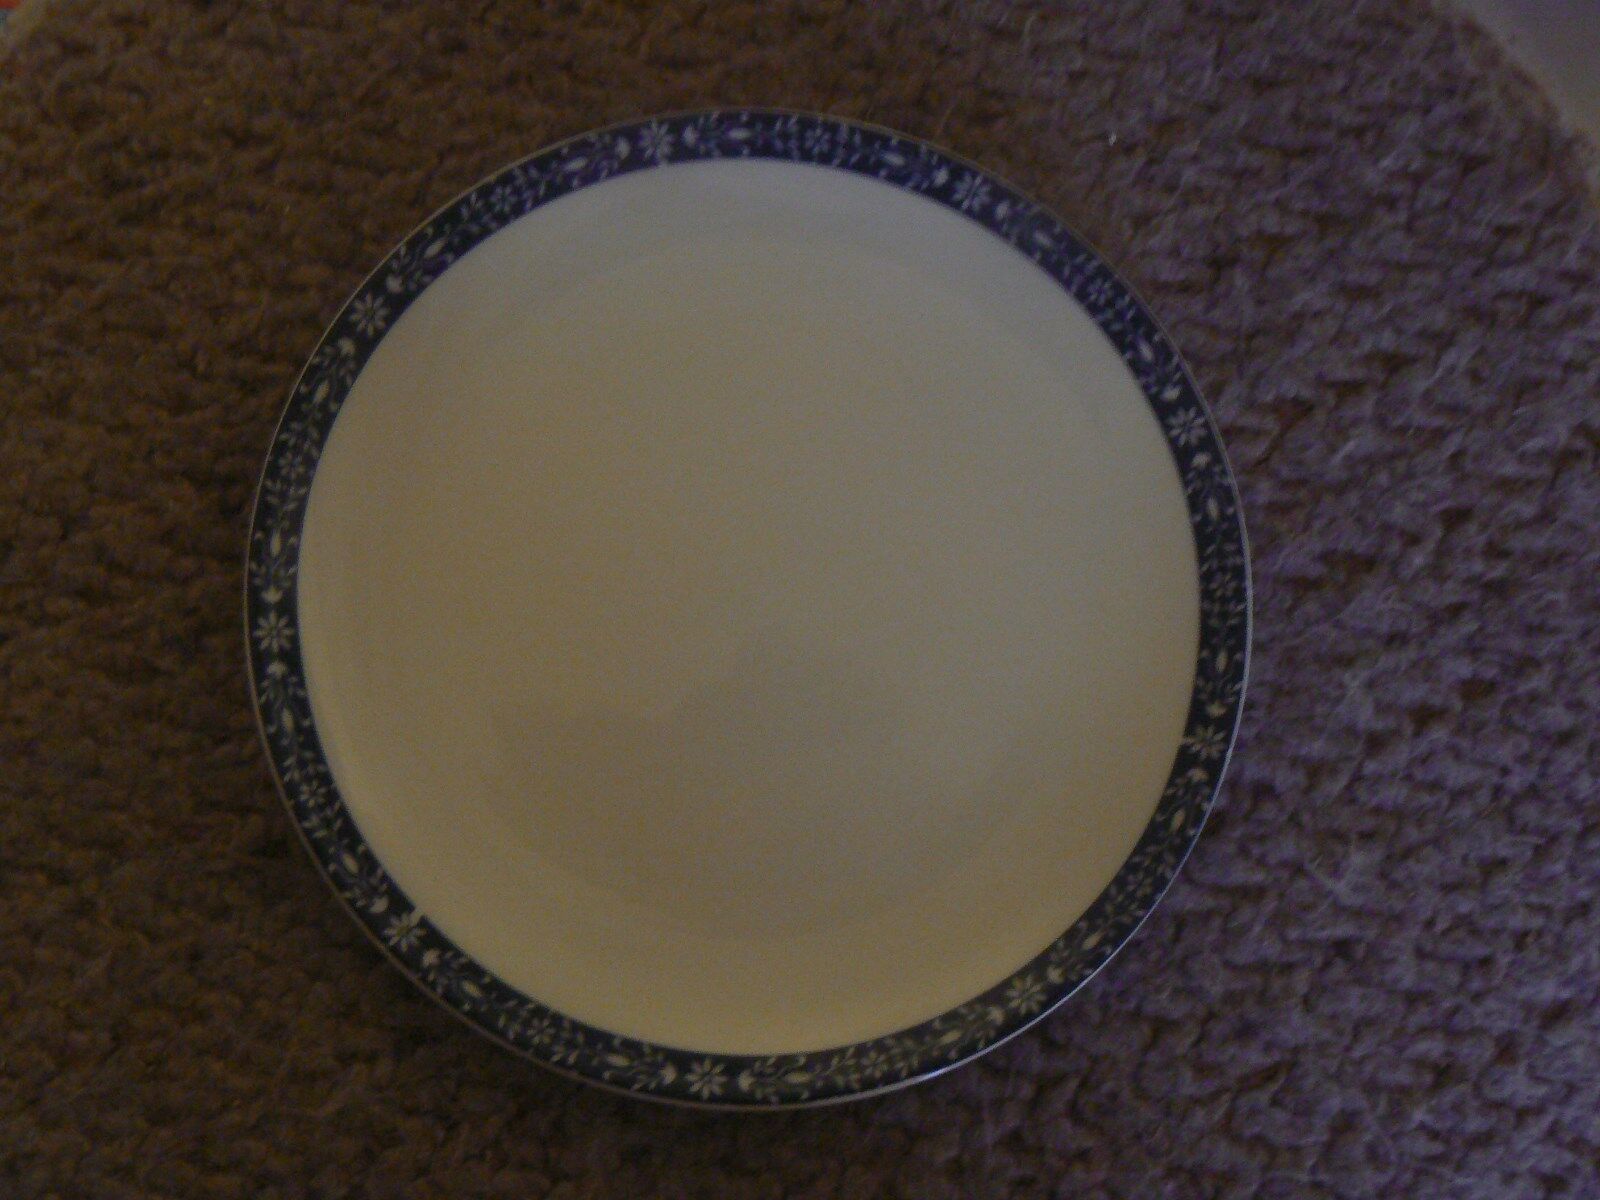 Royal Doulton Moonstone bread plate 6 available - $4.60